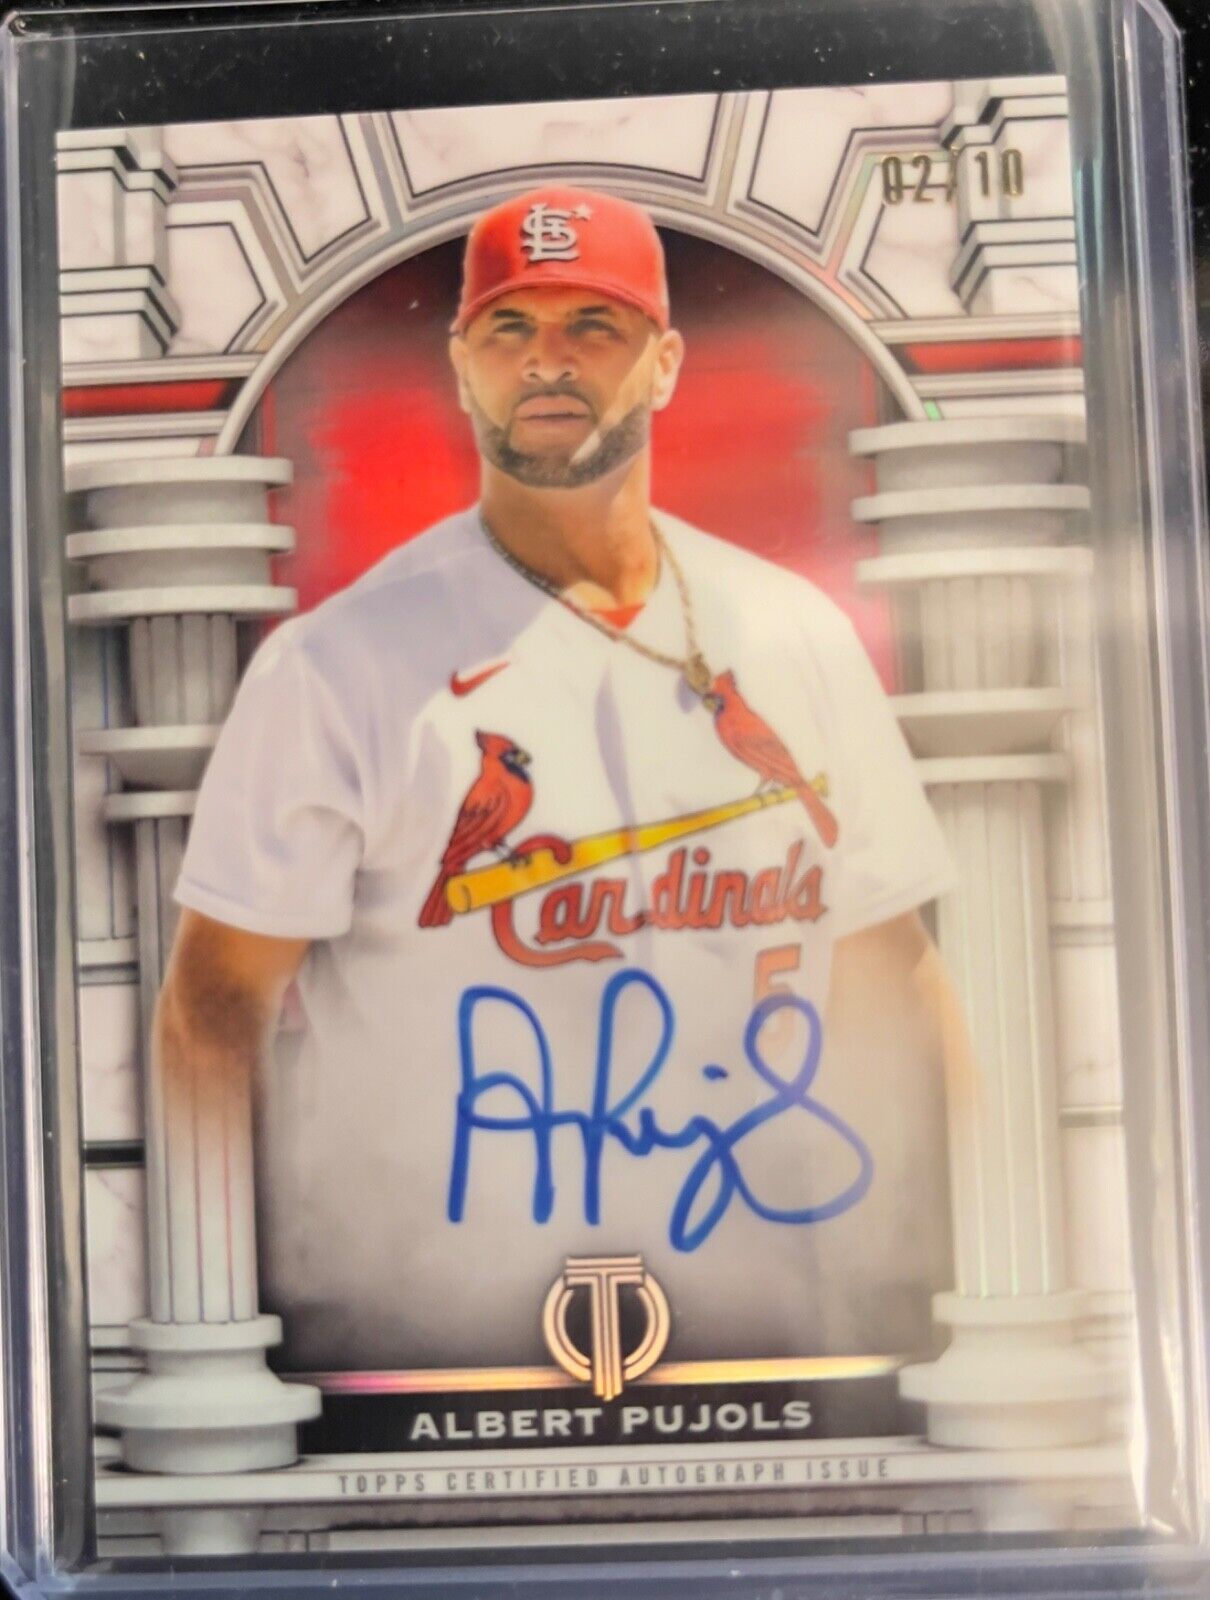 2023 Topps Tribute Albert Pujols Red Olympus On-Card Autograph /10 SSP